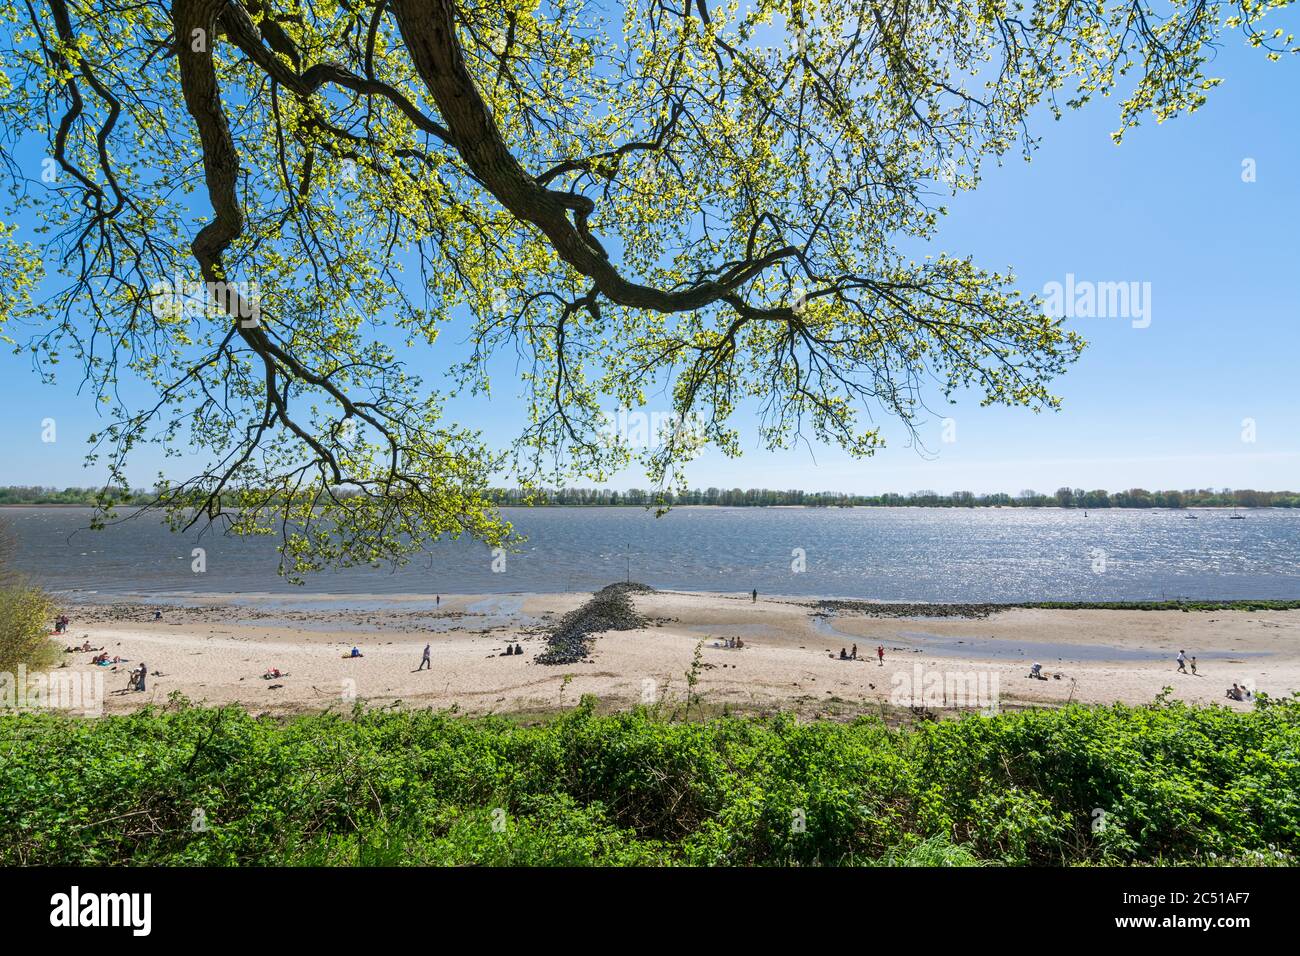 Tree branches overhanging the beach at the Elbe river in Wedel, Germany Stock Photo